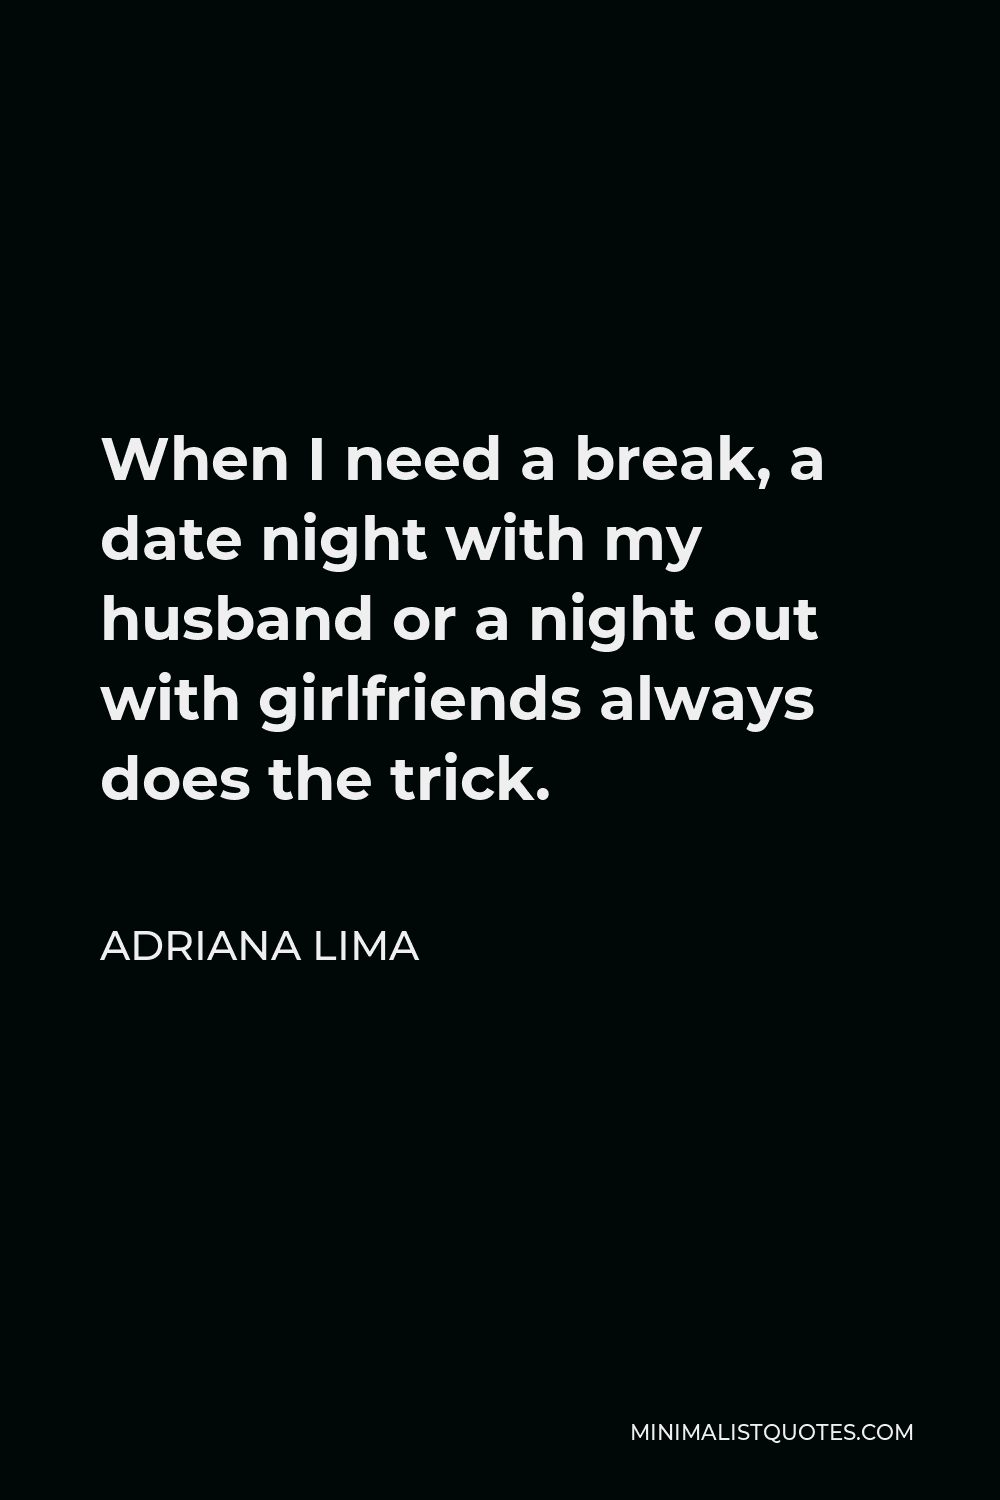 Adriana Lima Quote - When I need a break, a date night with my husband or a night out with girlfriends always does the trick.